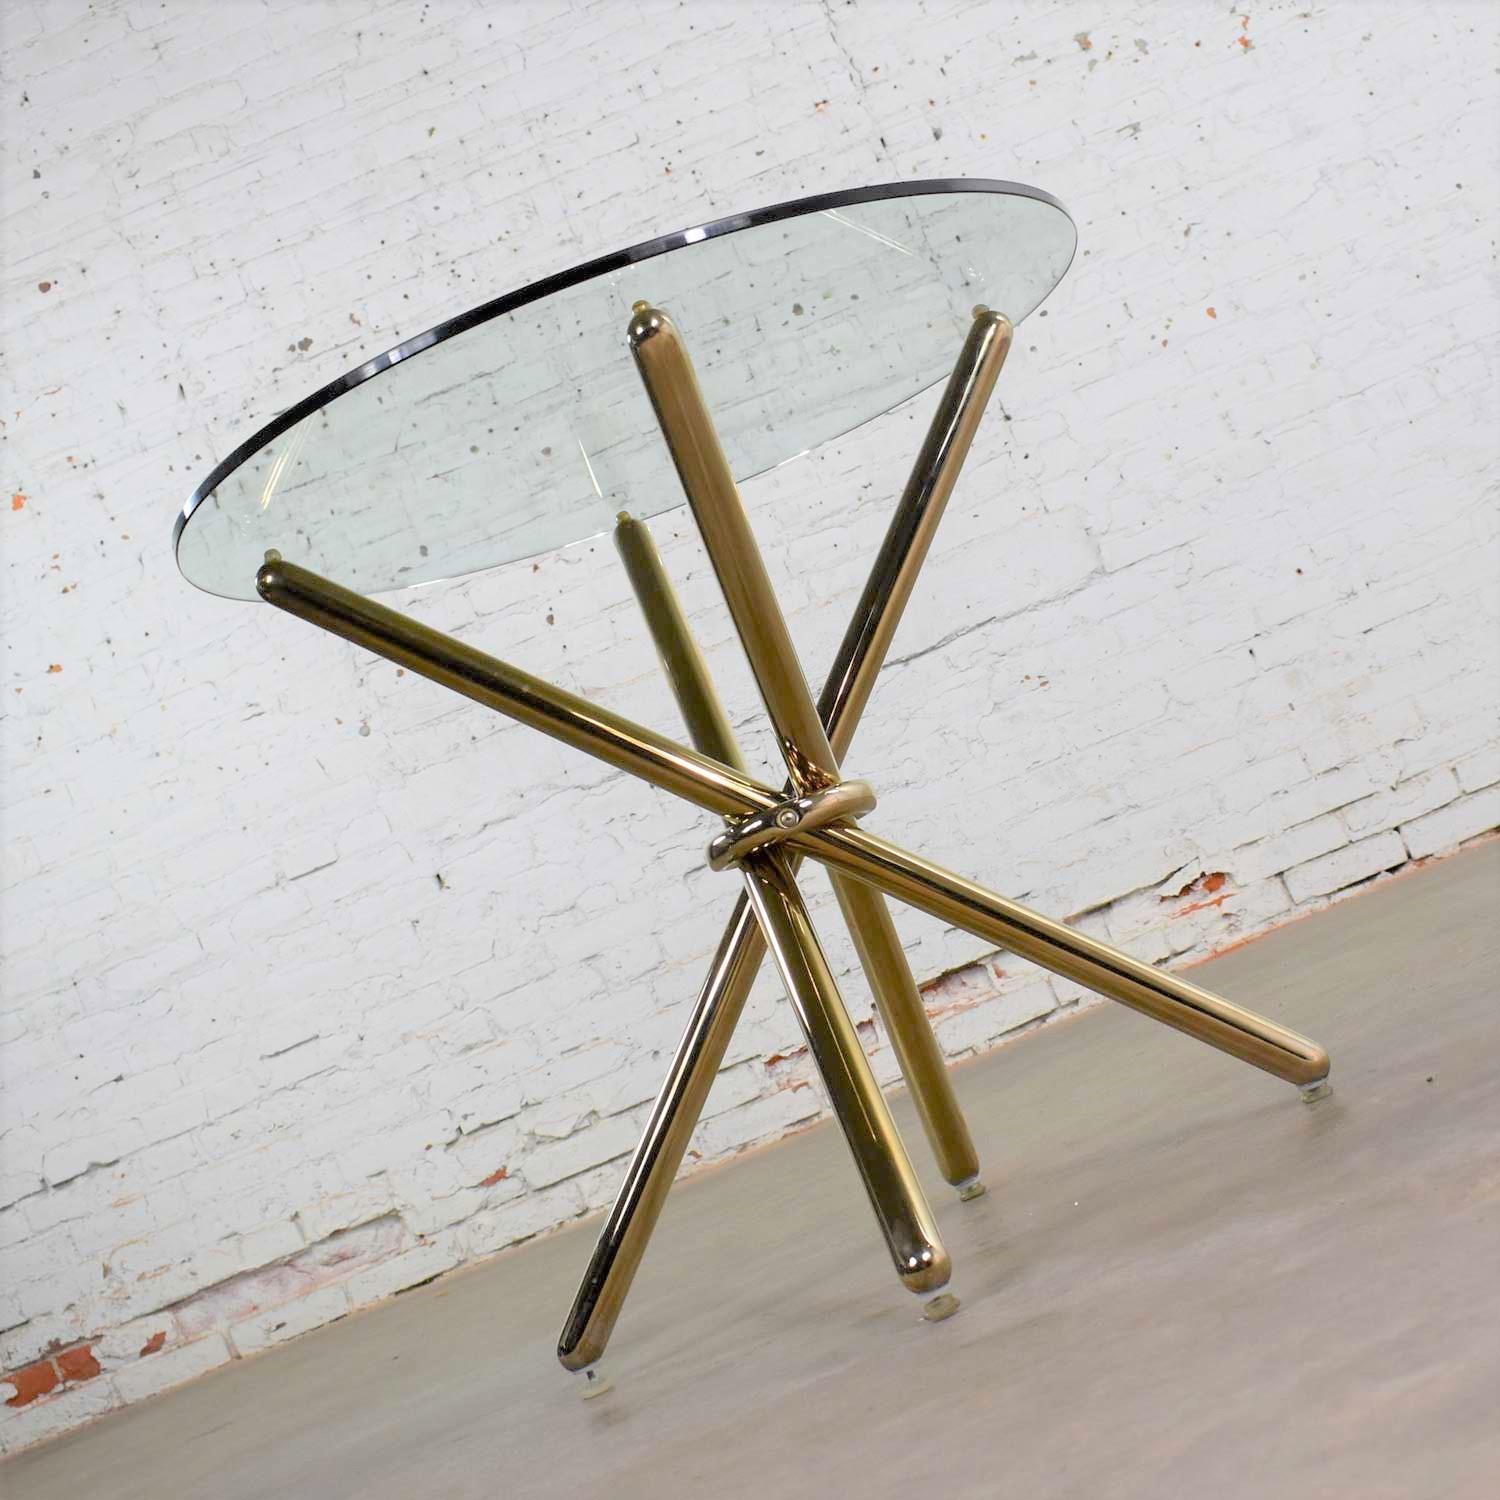 Handsome vintage modern brass-plated jax center table or end table with a 30-inch round glass top. It is in wonderful vintage condition. There may be some small signs of age to the brass-plated tube, but the glass is new. Please see photos, circa